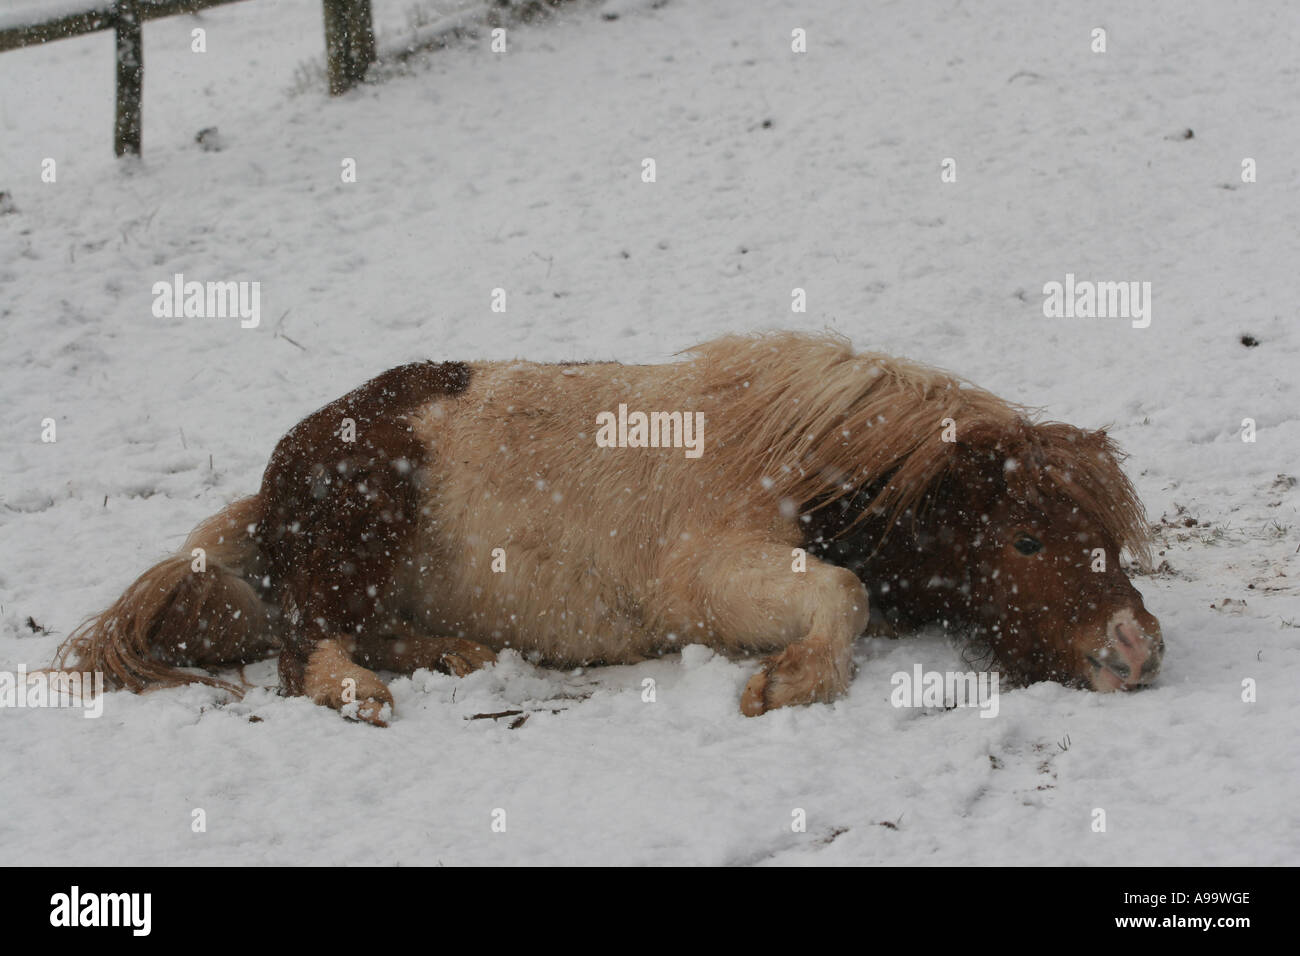 Miniature Horse in Snow Animal Natural World Environment Wales Stock Photo